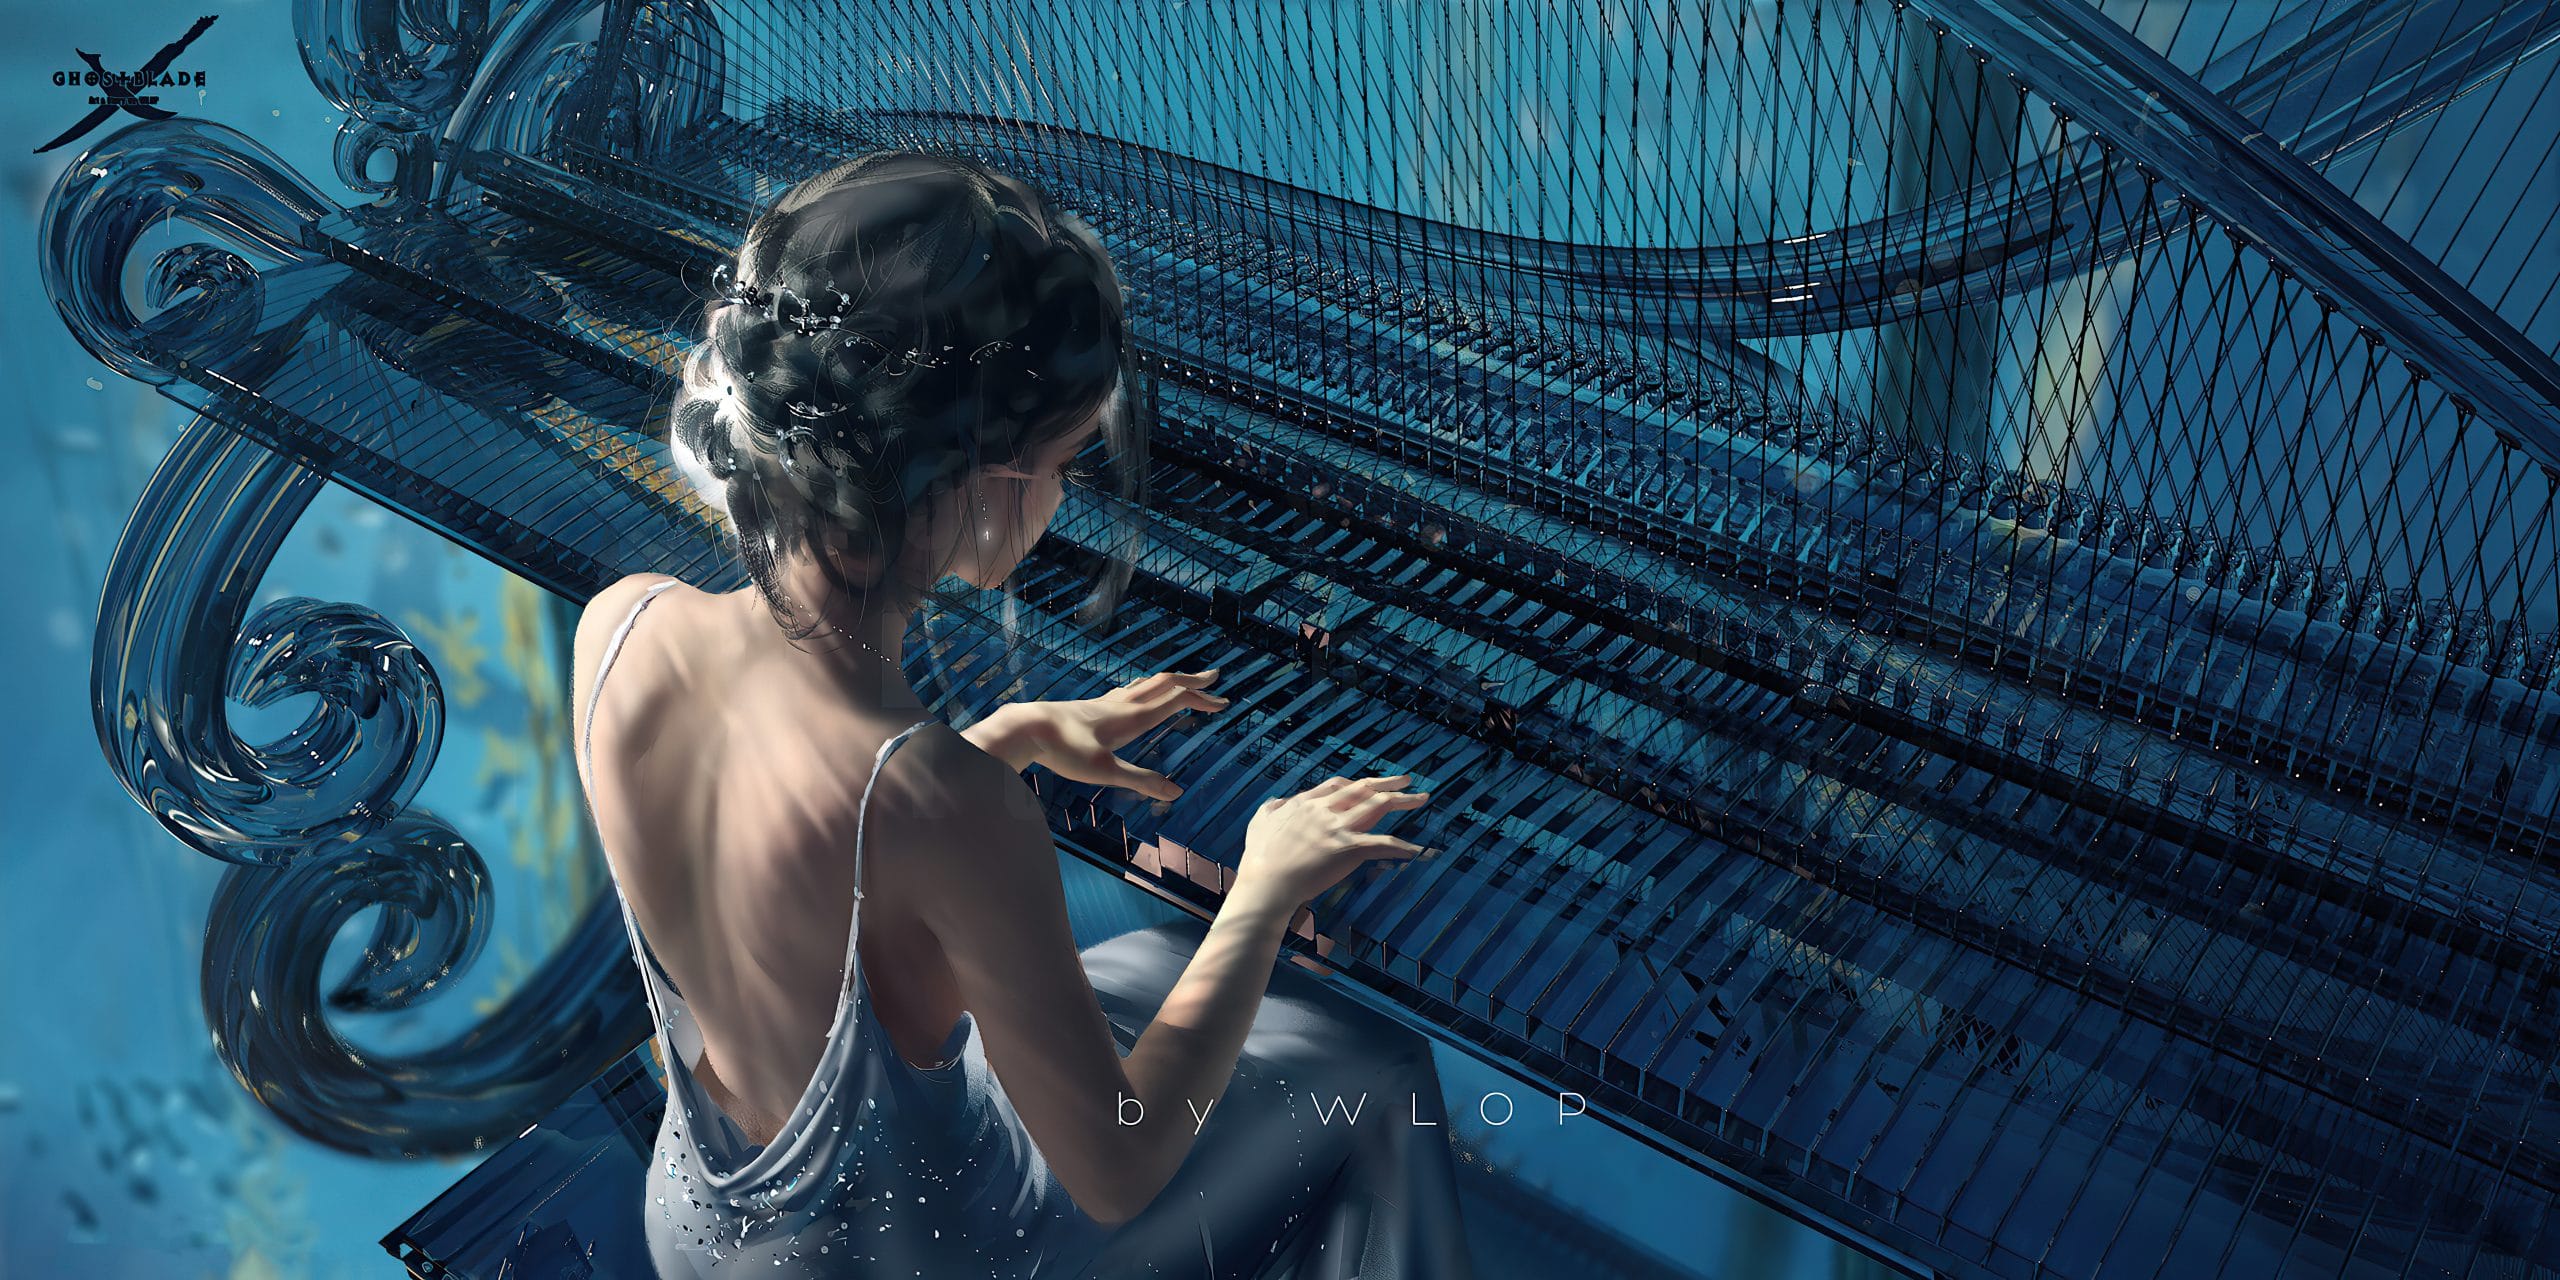 An elf playing the piano - An impressive artwork of WLOP 